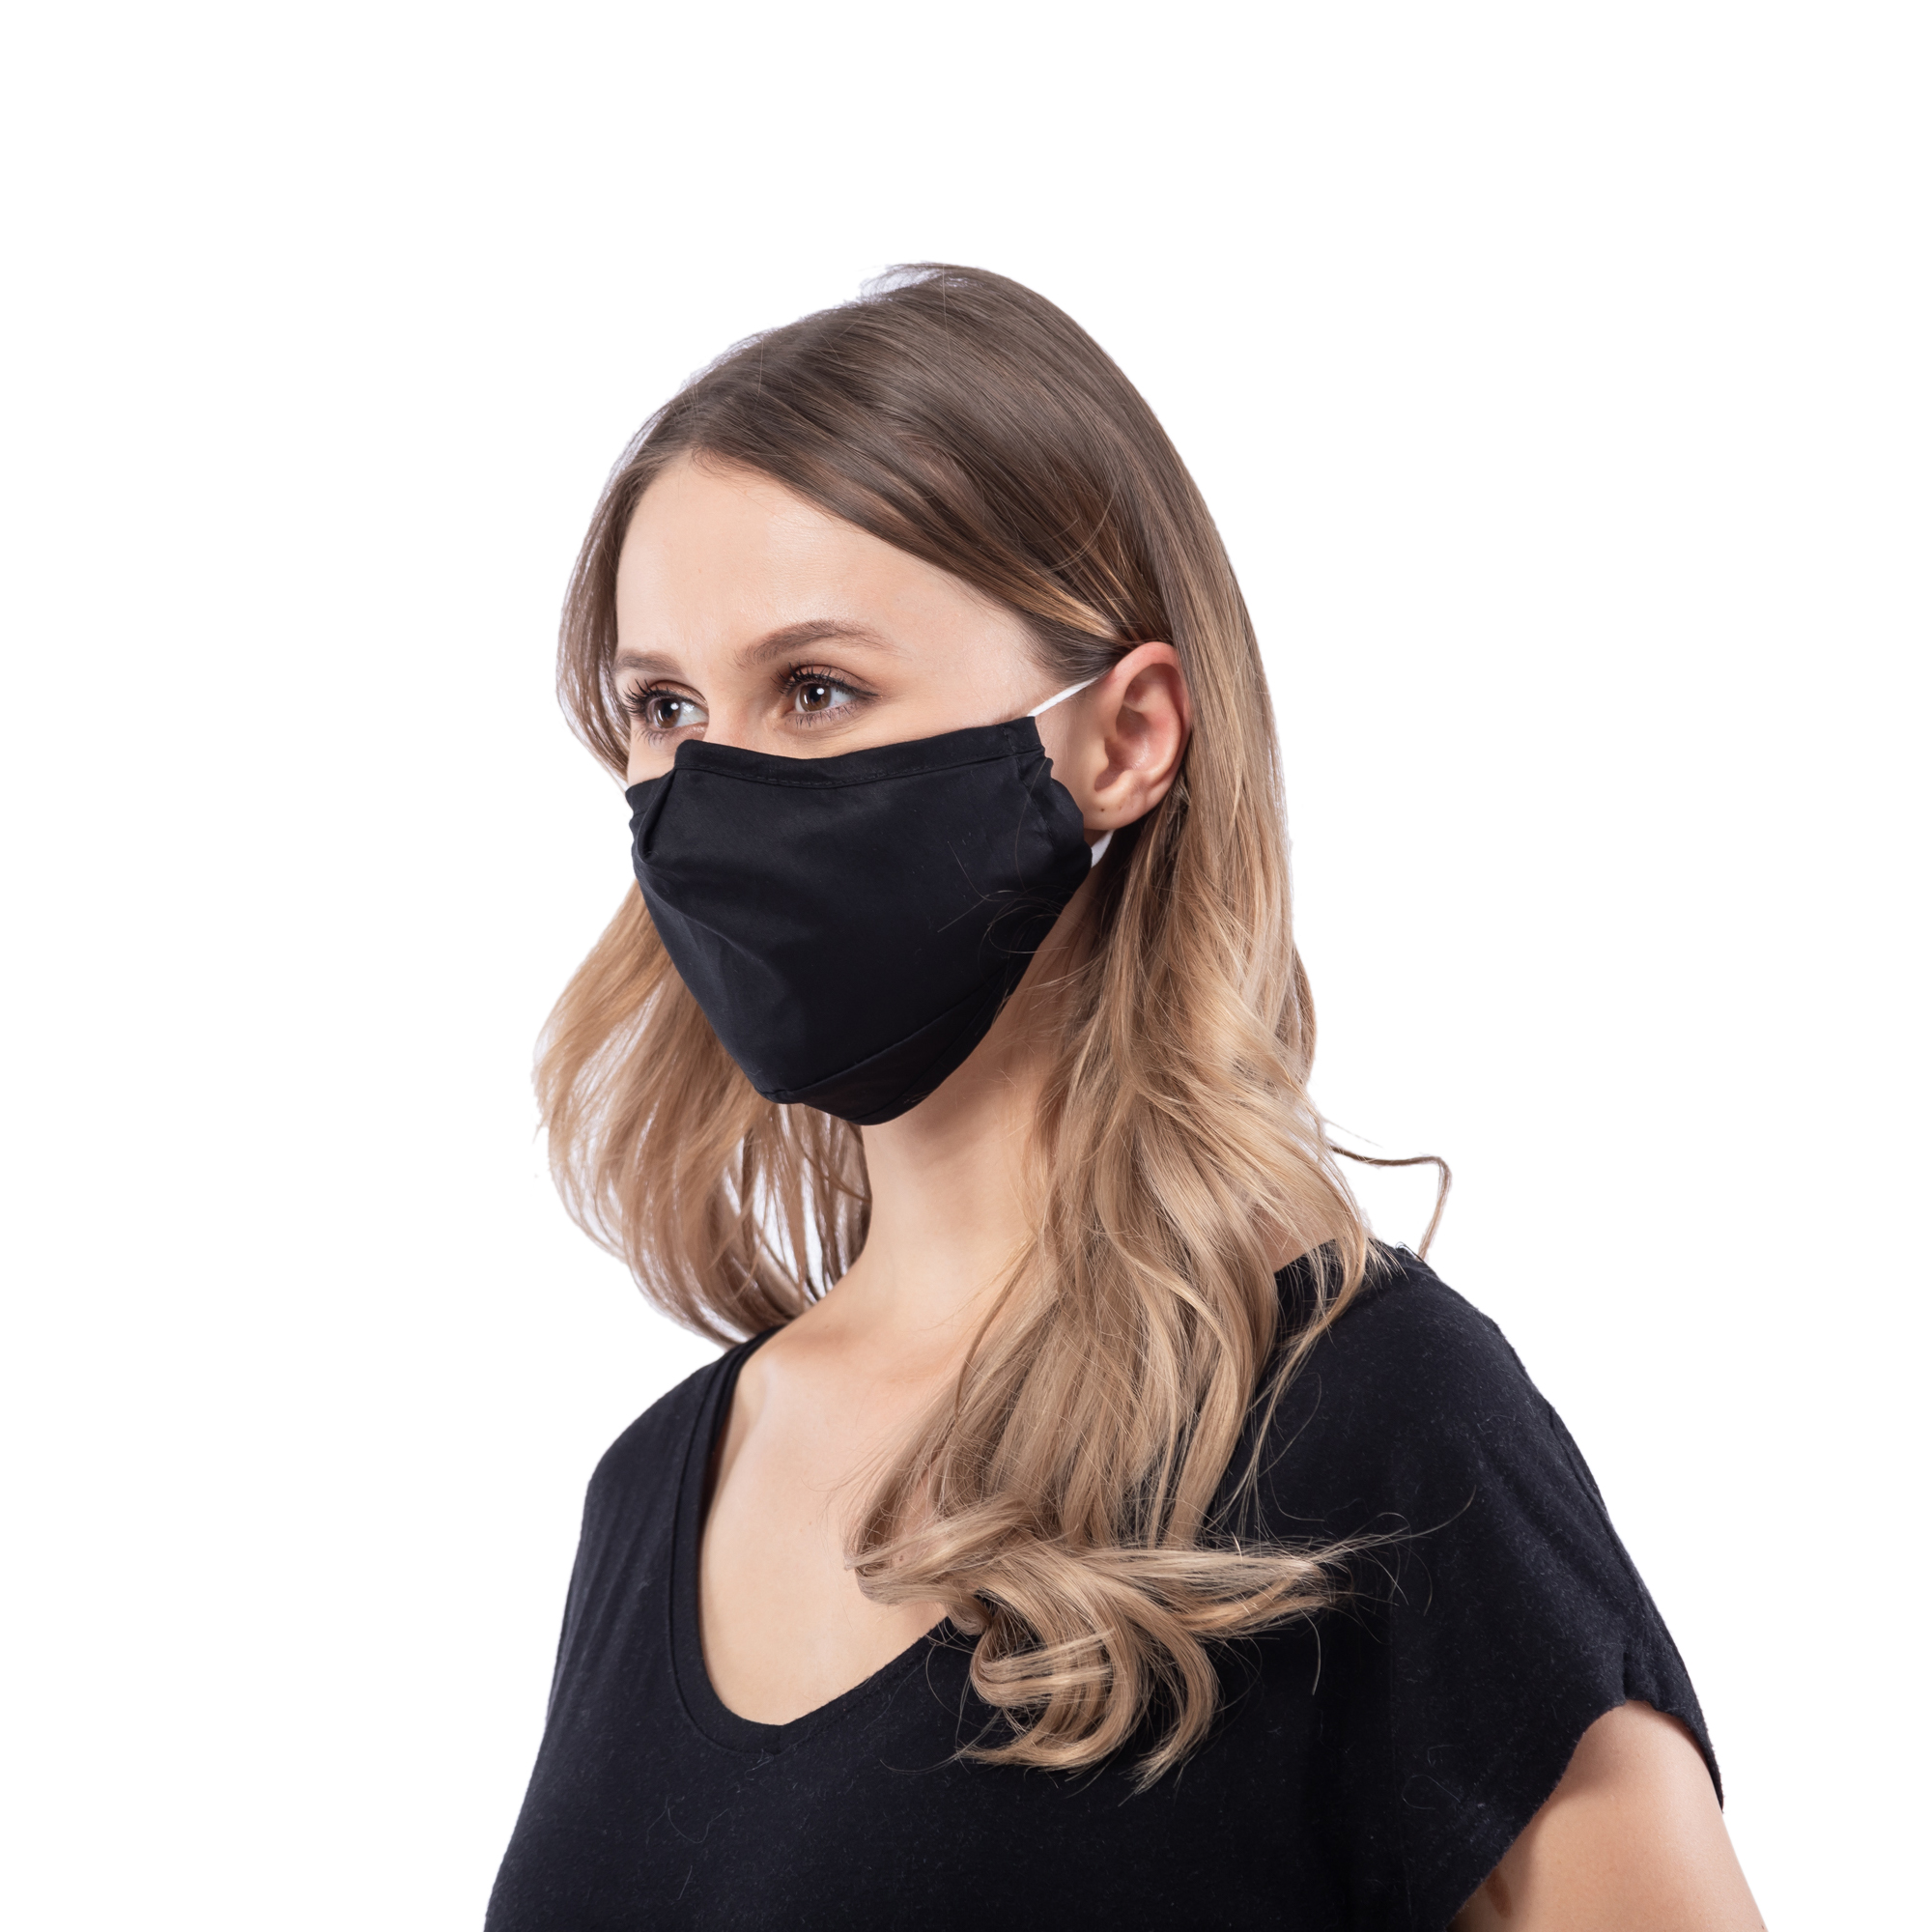 Adult 4-Layer Cotton Mask - Includes 1 Replaceable PM2.5 Filter and Adjustable Ear Straps - BLACK